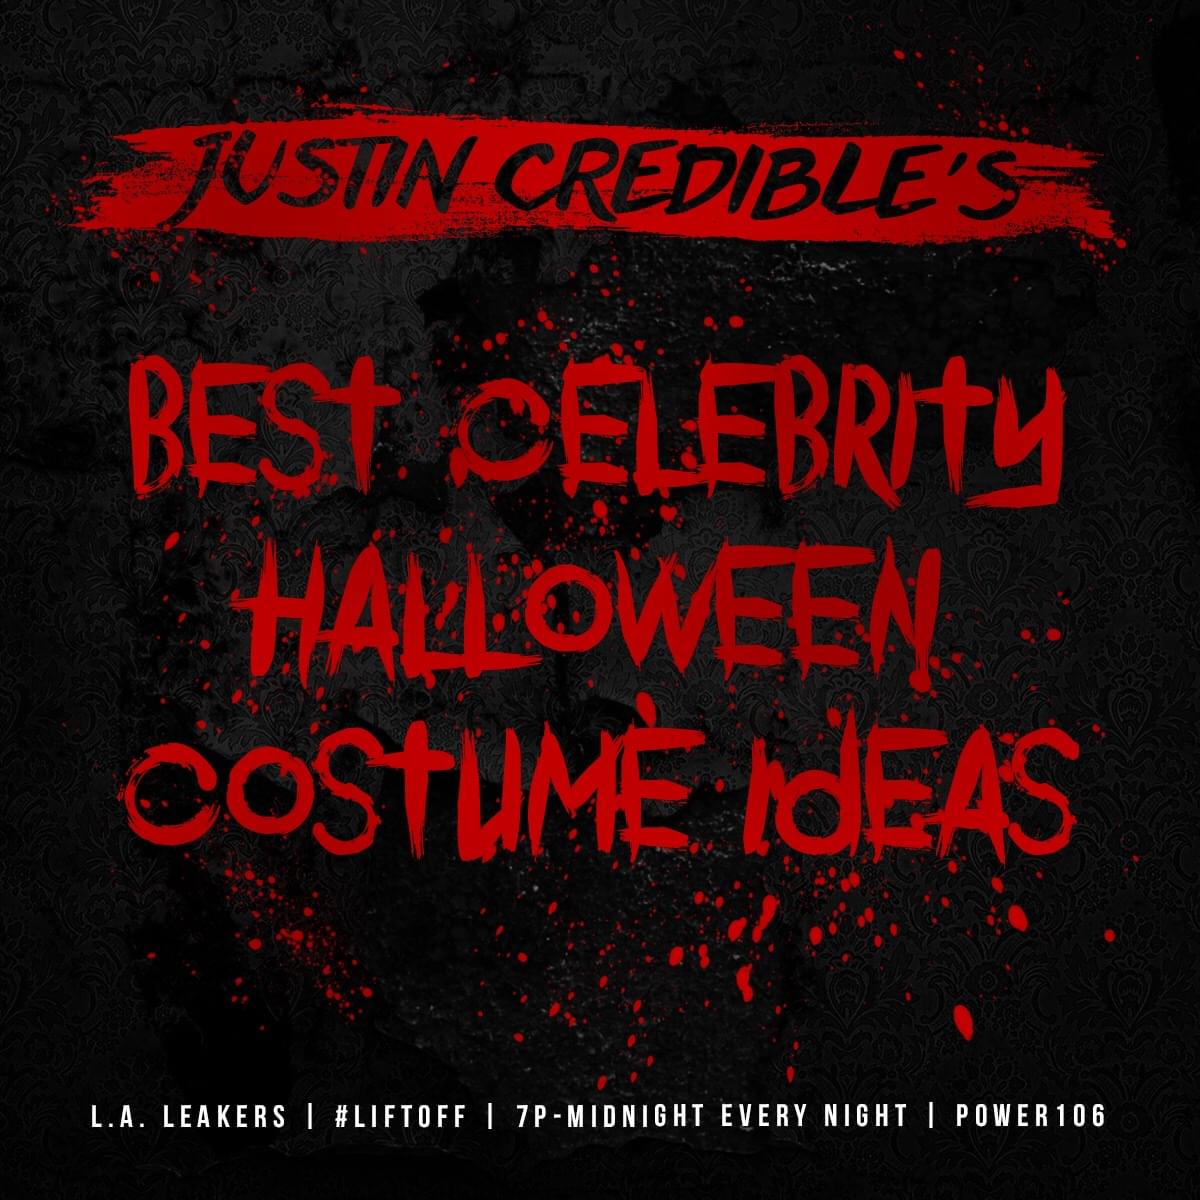 Justin Credible’s Favorite Celebrity Halloween Costumes!!!